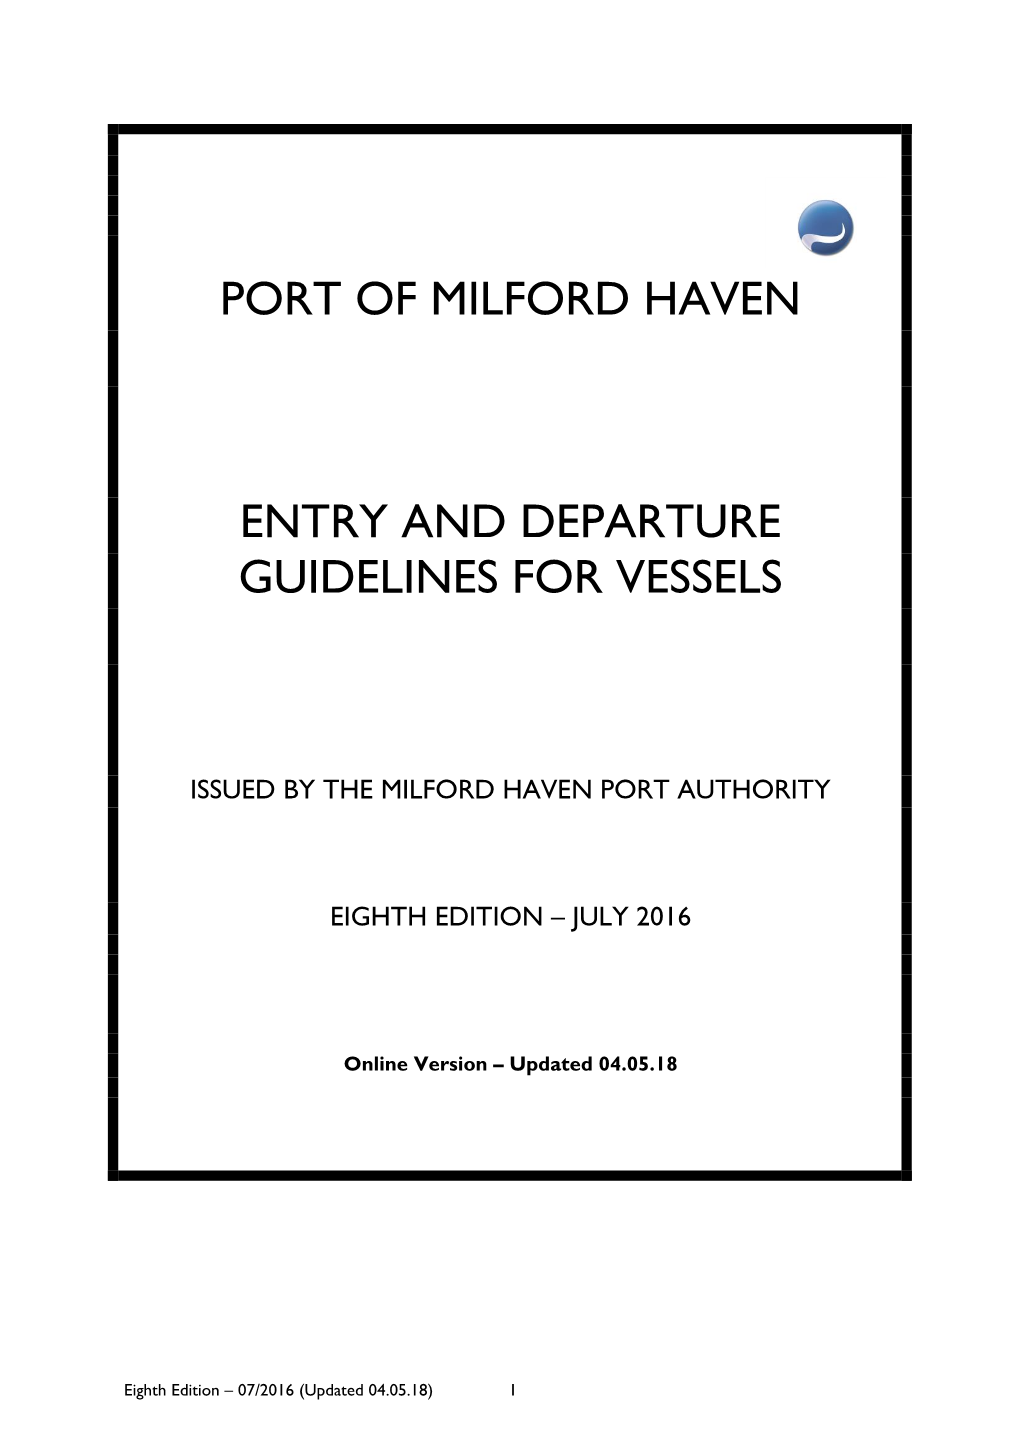 Port of Milford Haven Entry and Departure Guidelines for Vessels